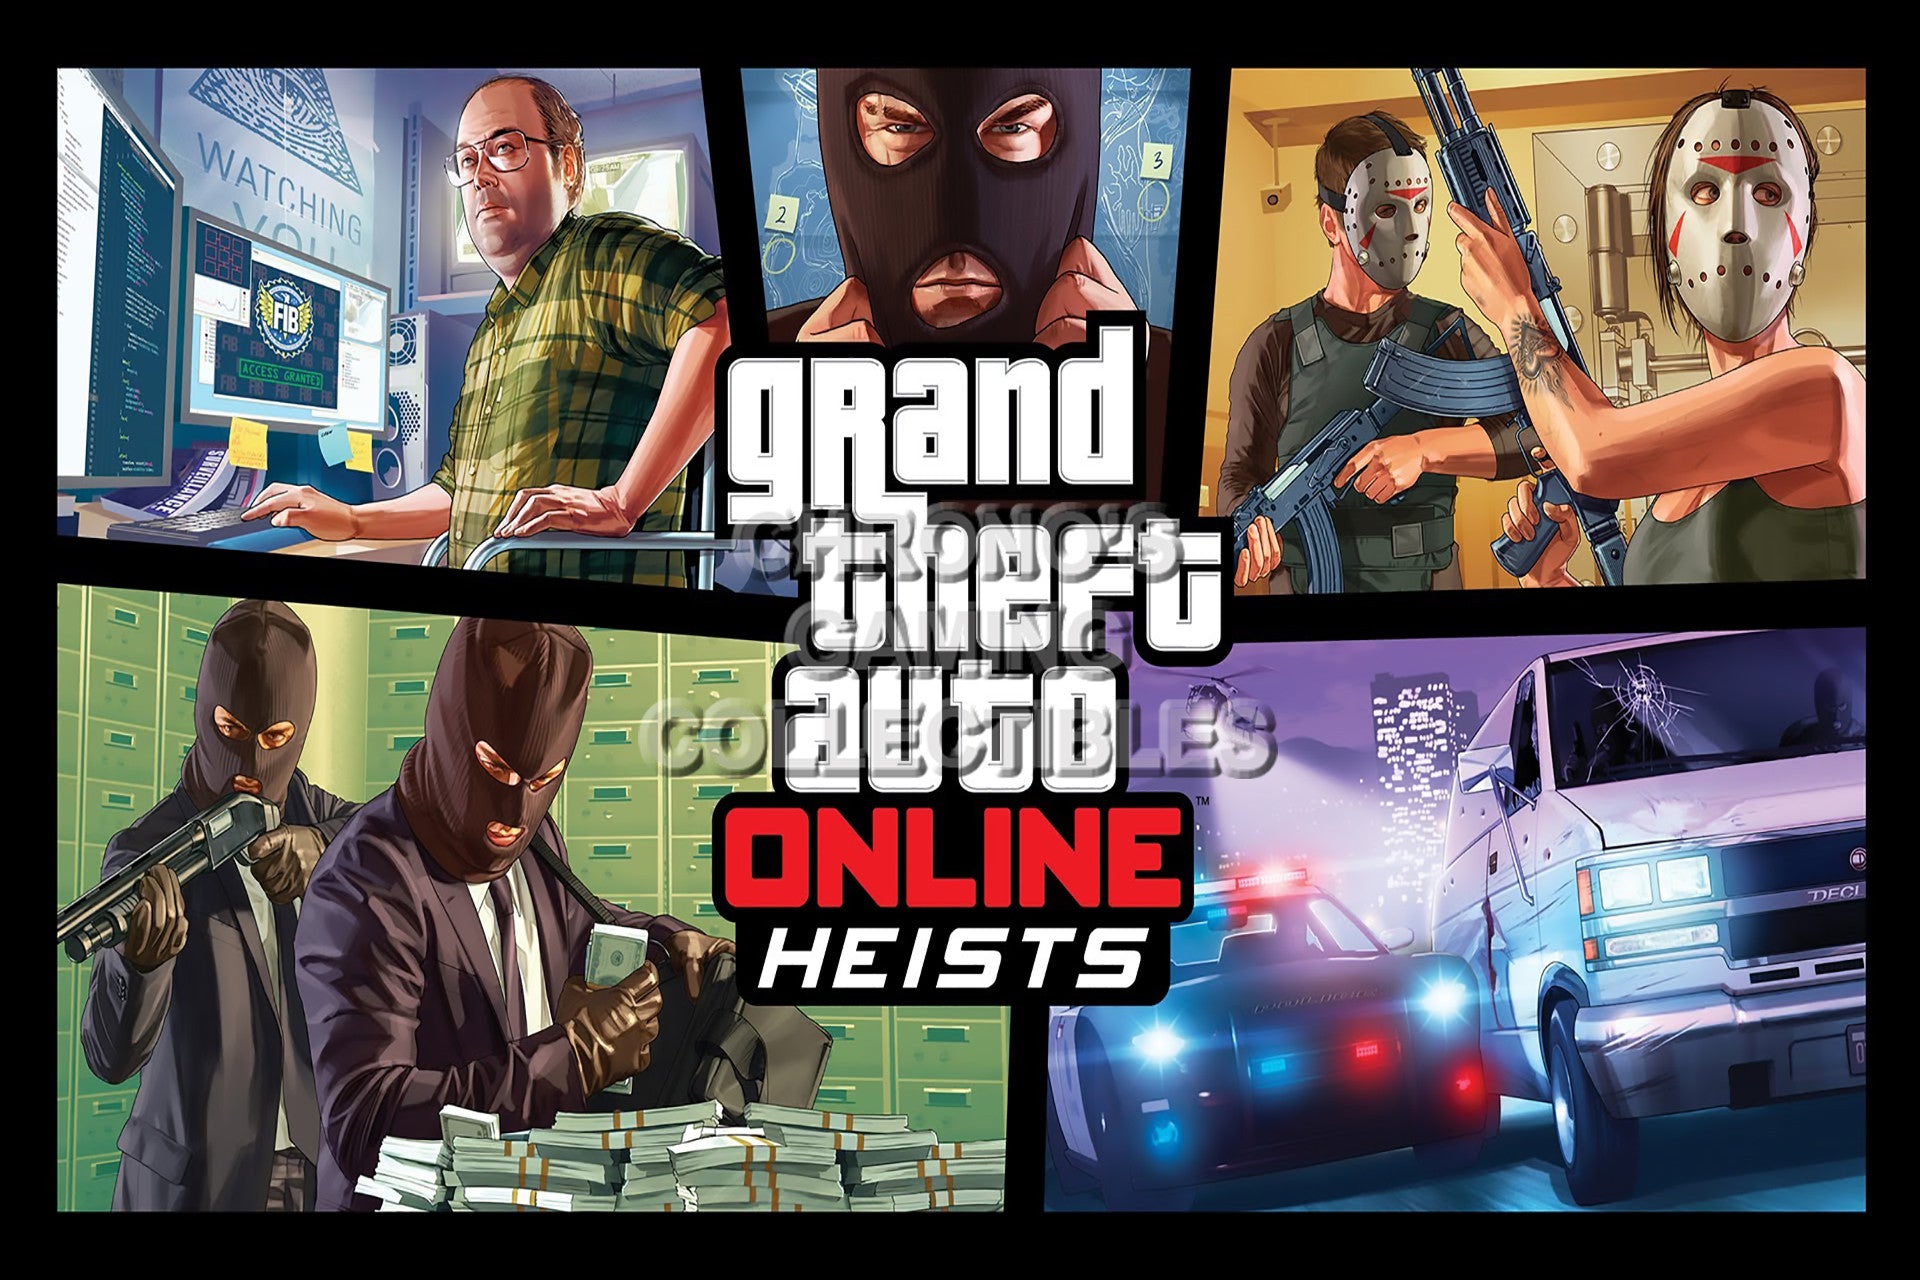 httpsproductscgc huge poster grand theft auto online ps3 ps4 xbox 360 one gta006